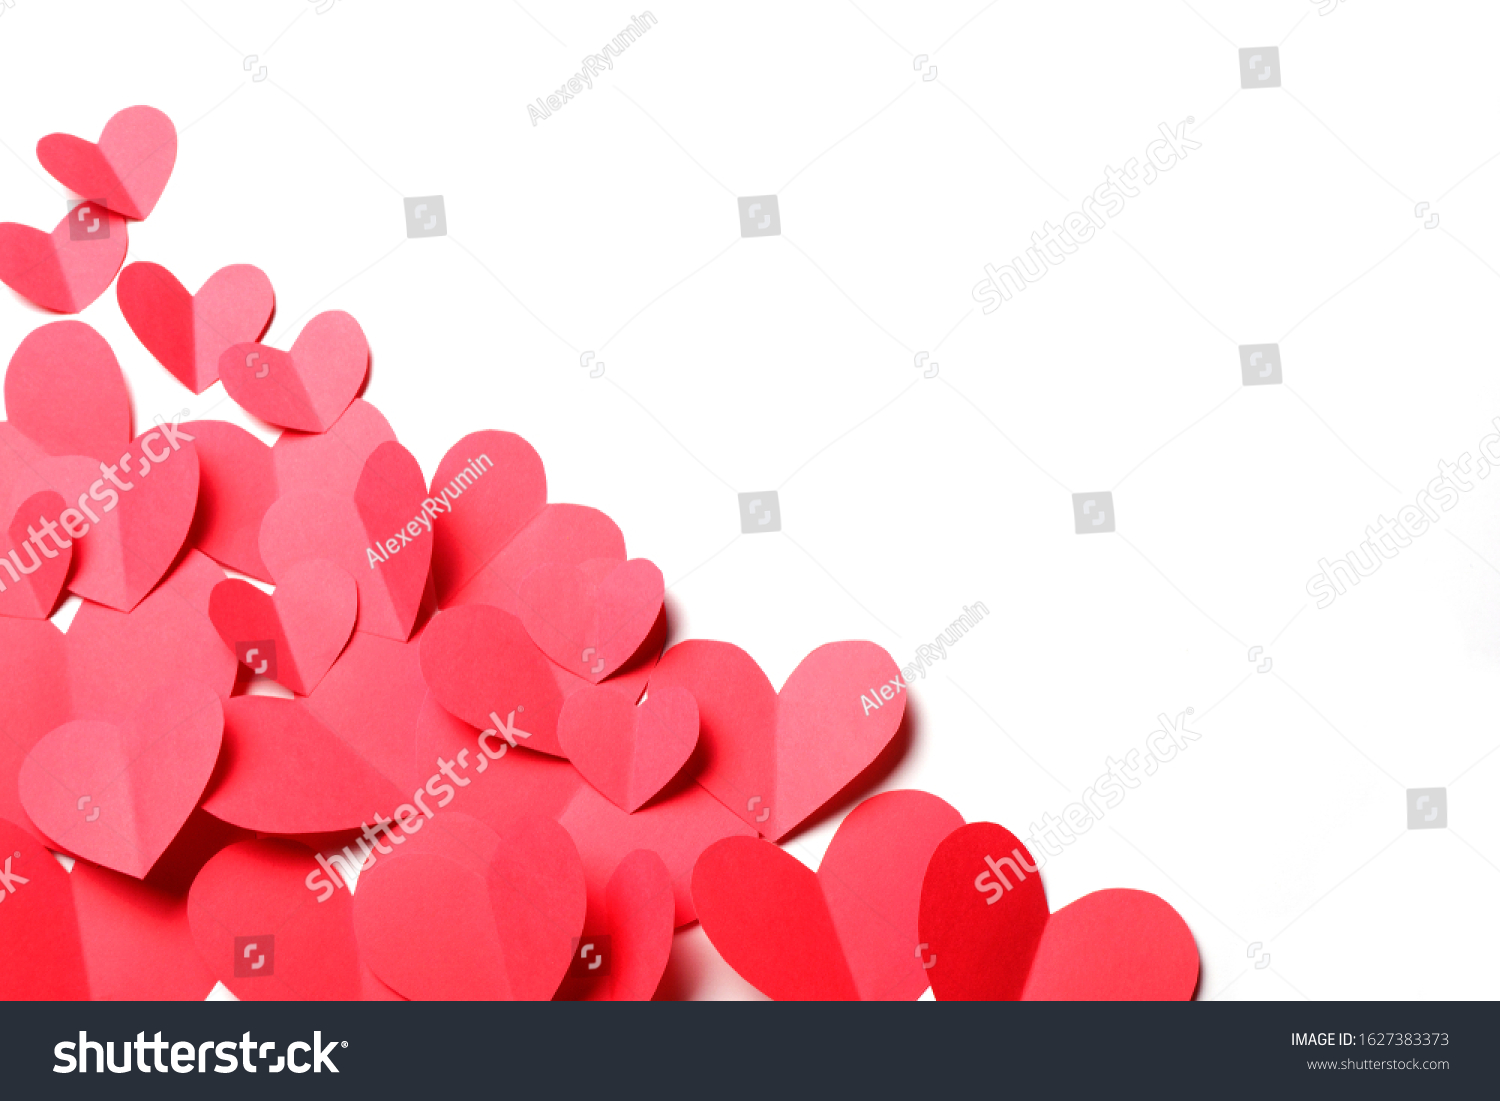 Cut out of red paper hearts on white background isolated. Cute Valentines day, Womans day, love, romantic or wedding composition with copy space for your text for banner, congratulation, card, offer, flyer, advertising, invitation.